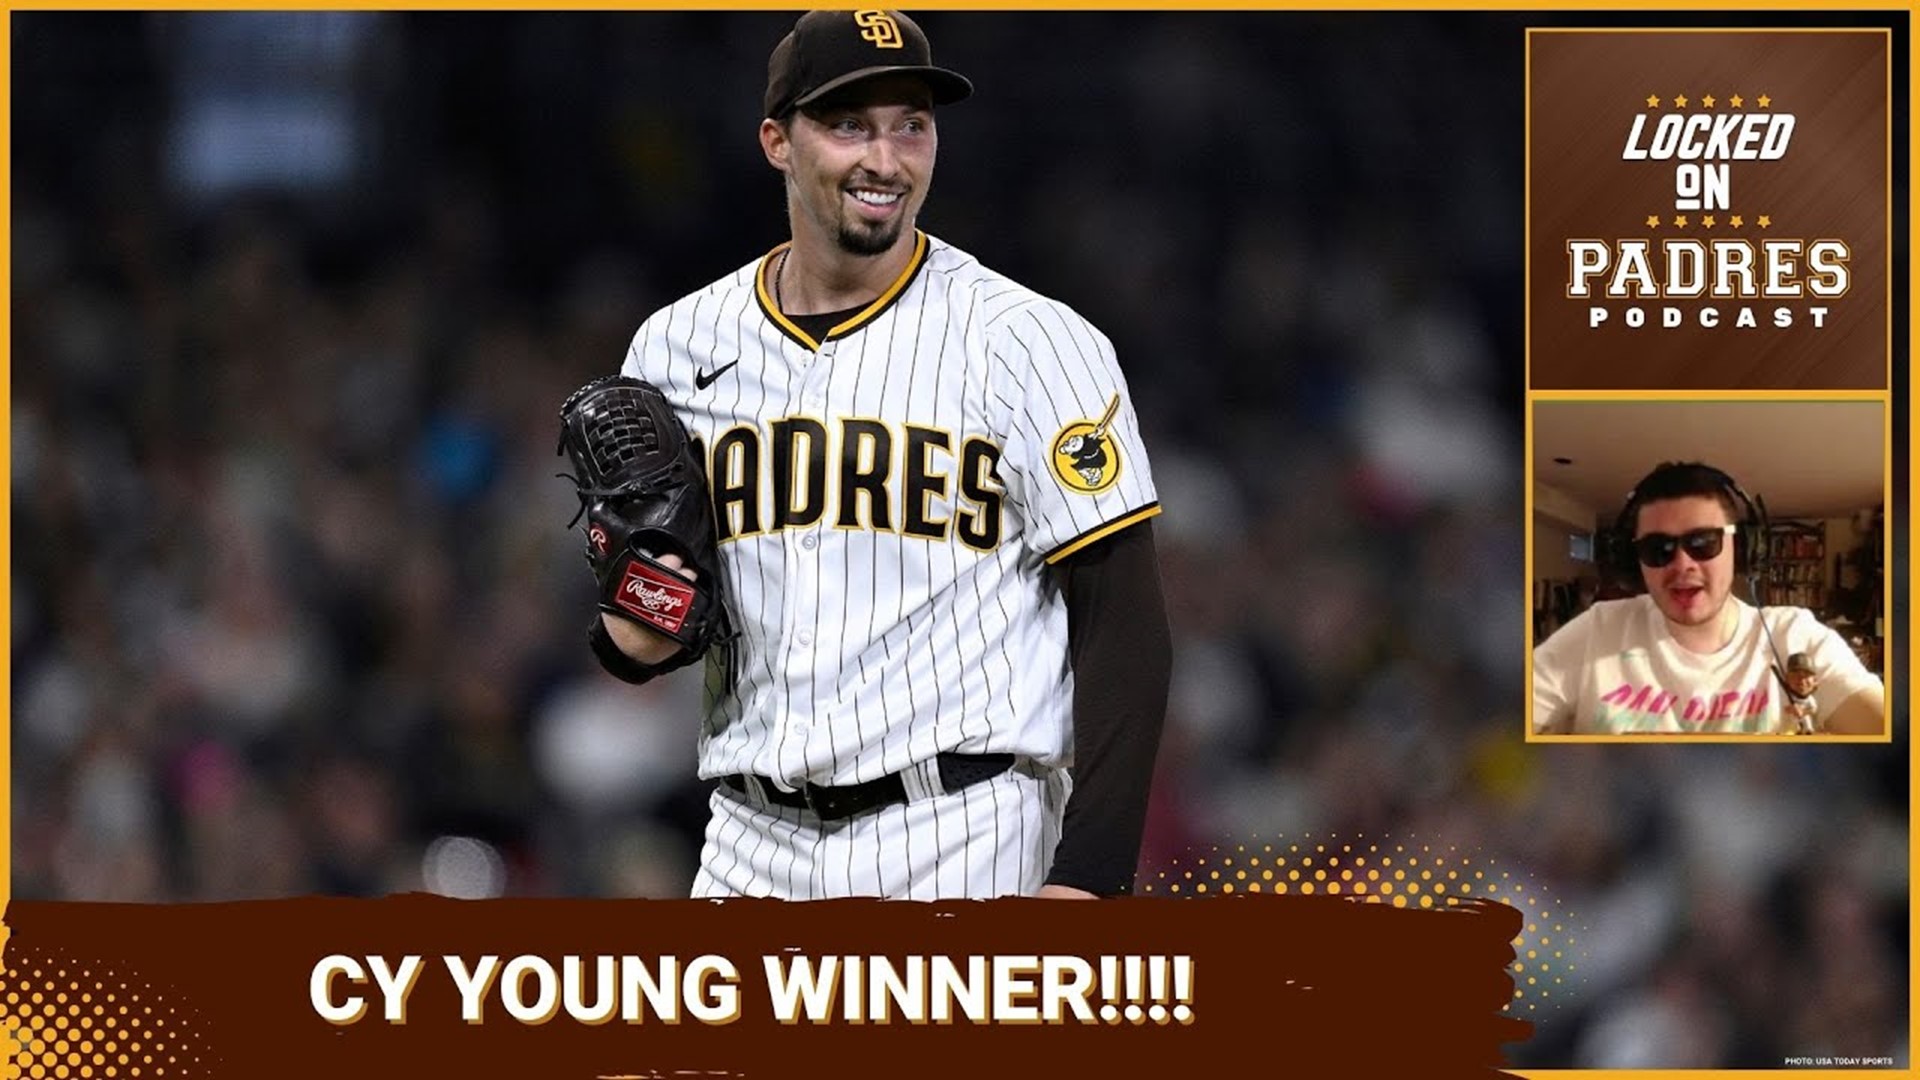 On today's very special episode, Javier celebrates Blake Snell officially winning the National League Cy Young award